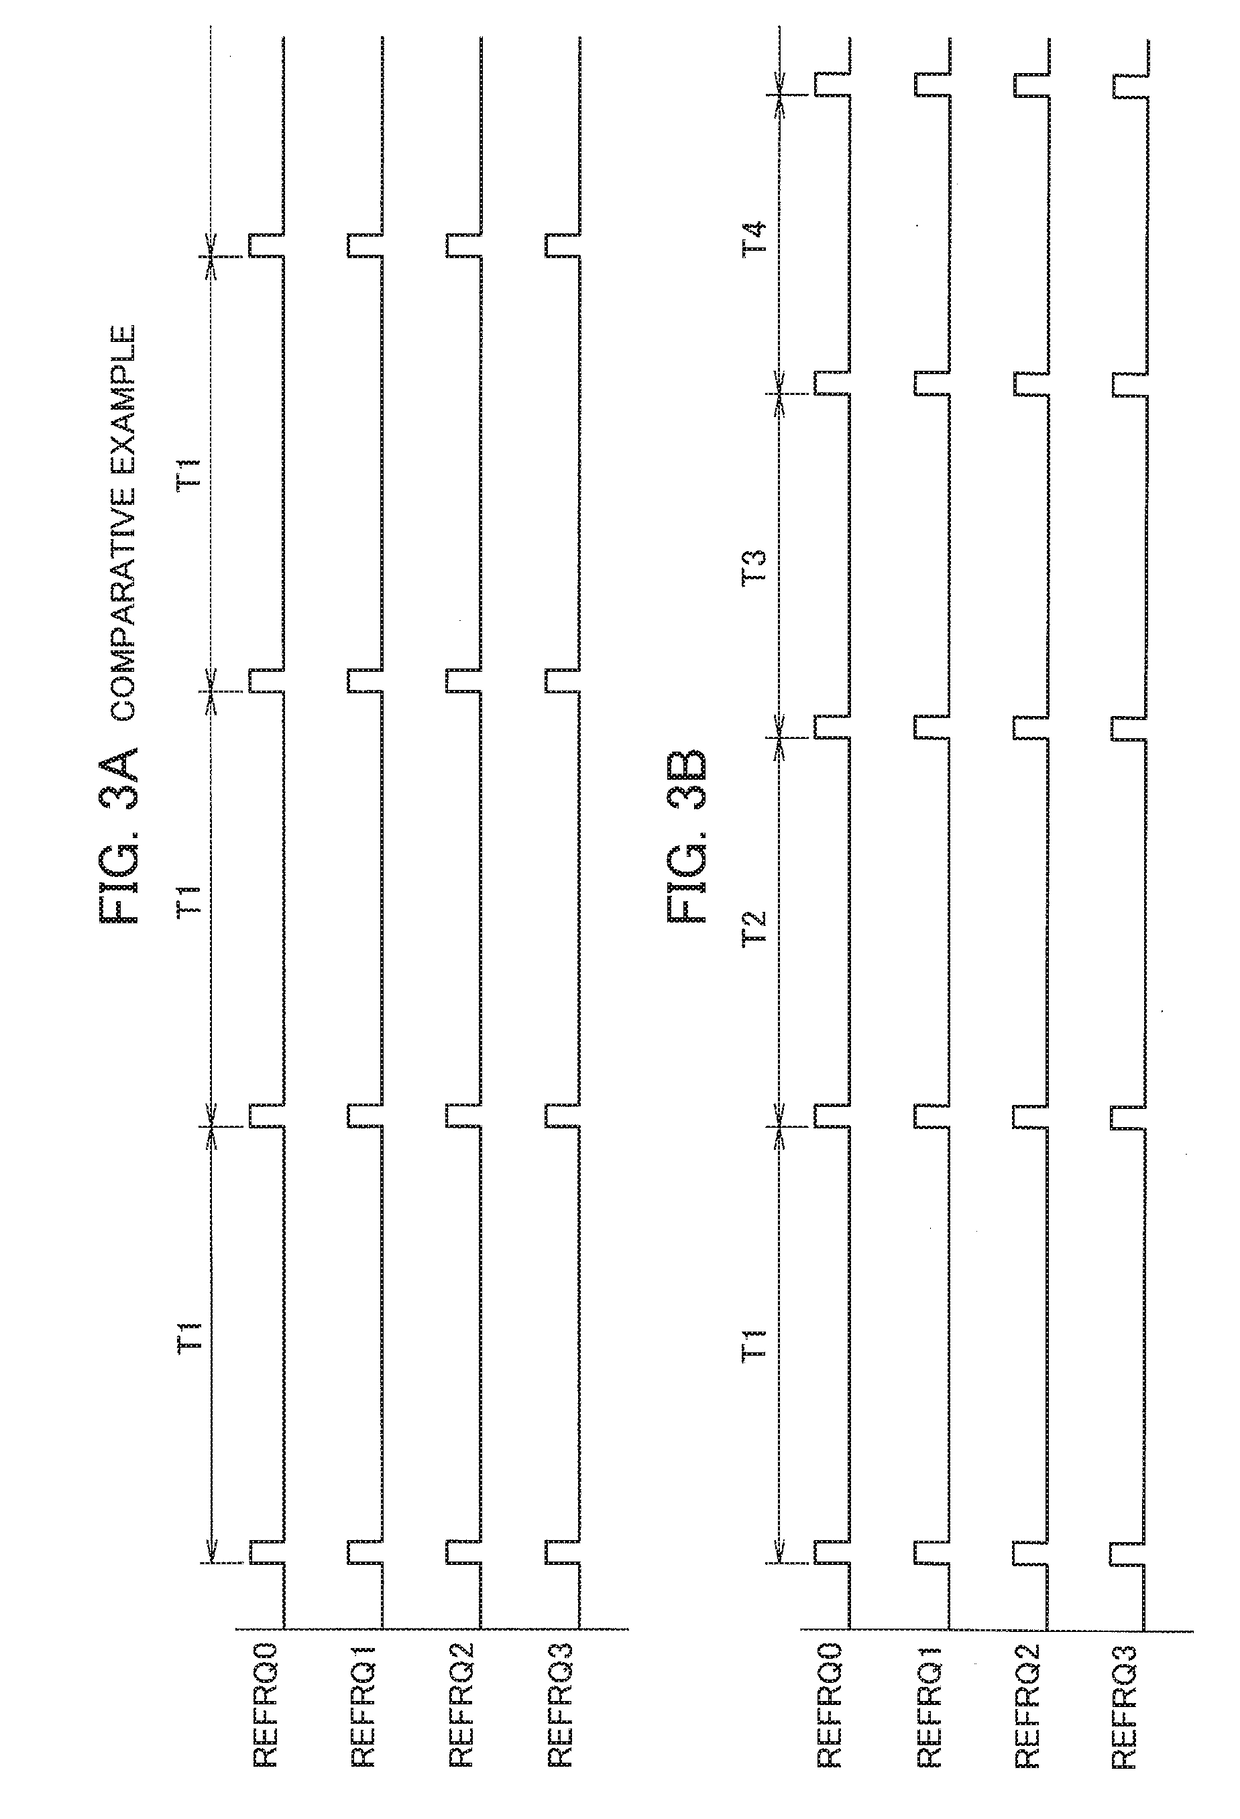 Volatile semiconductor memory management device